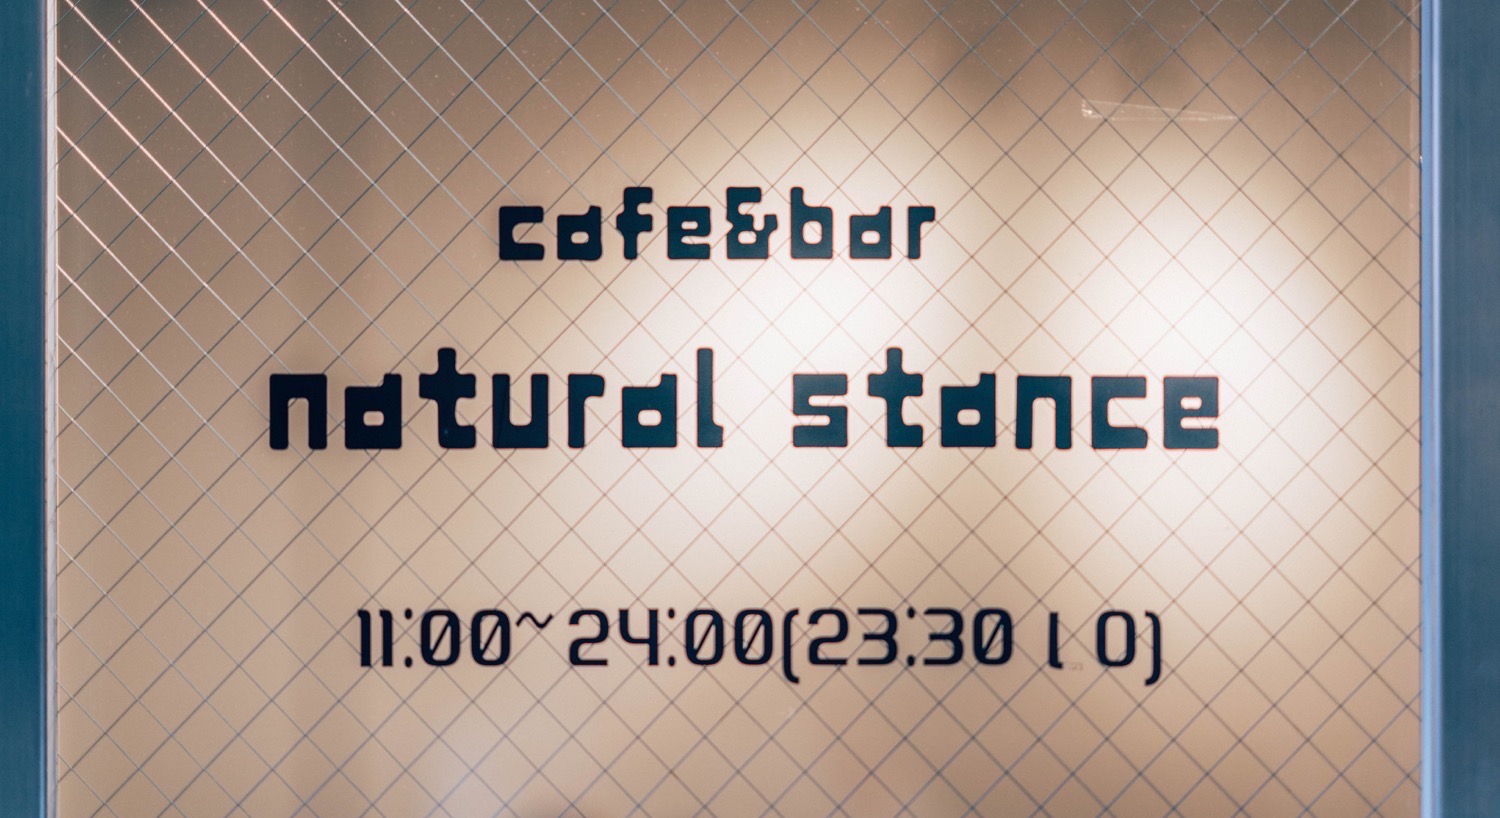 Natural stance 3